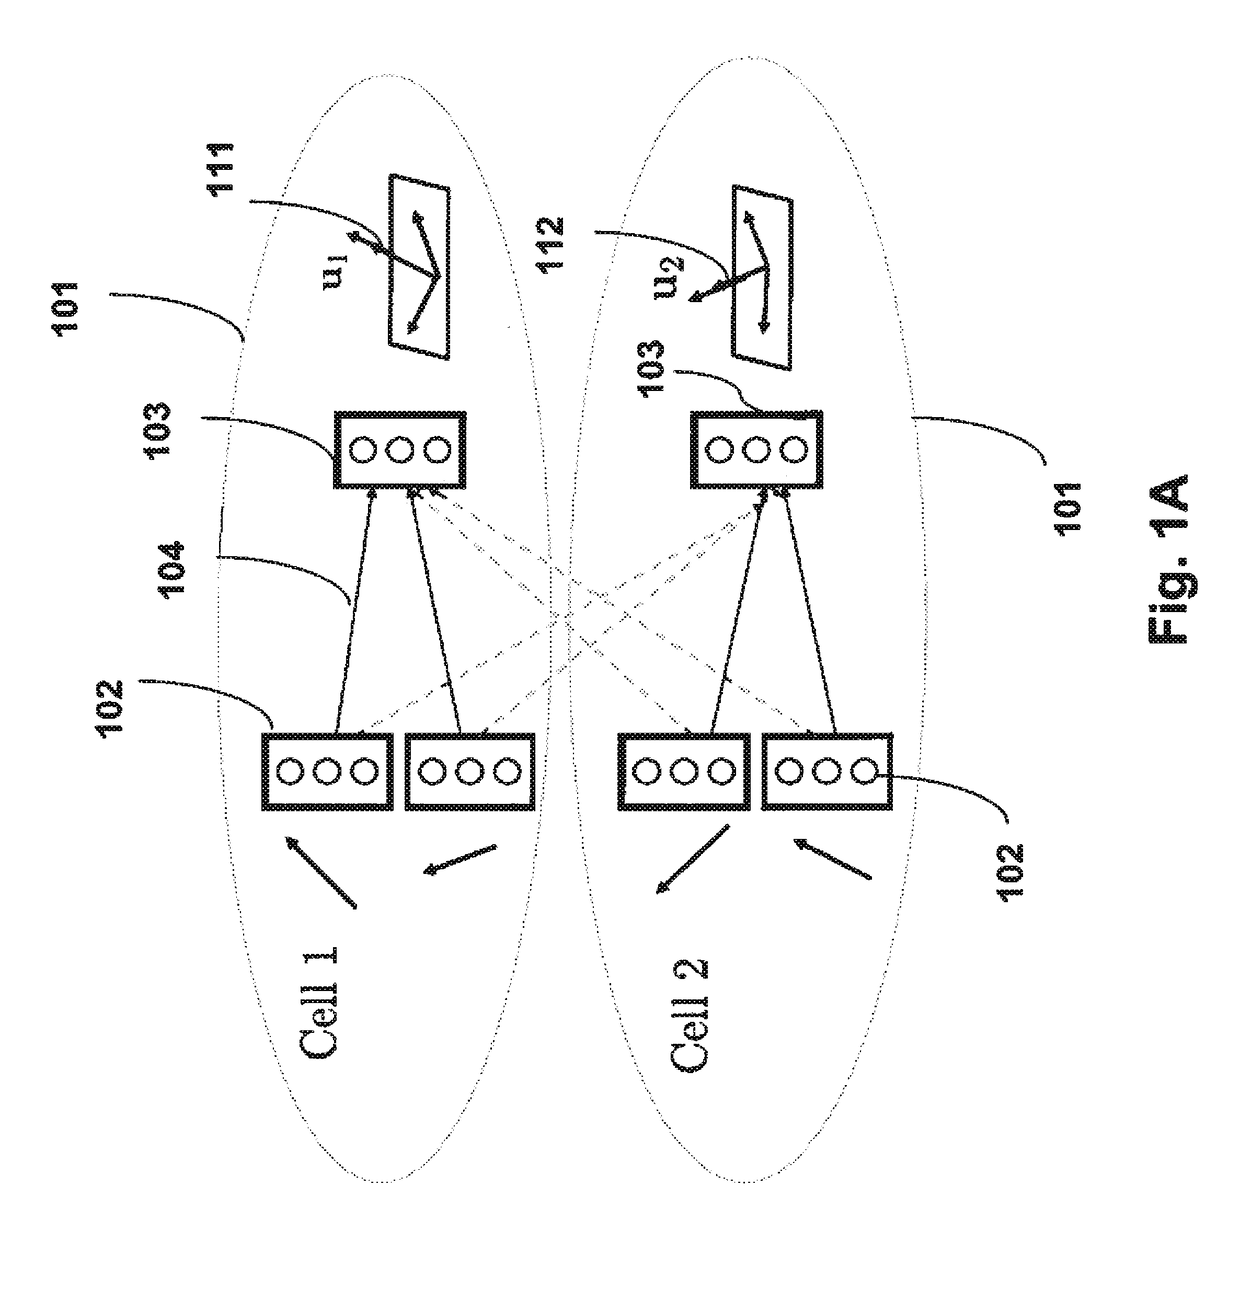 Method for reducing interference in multi-cell multi-user wireless networks